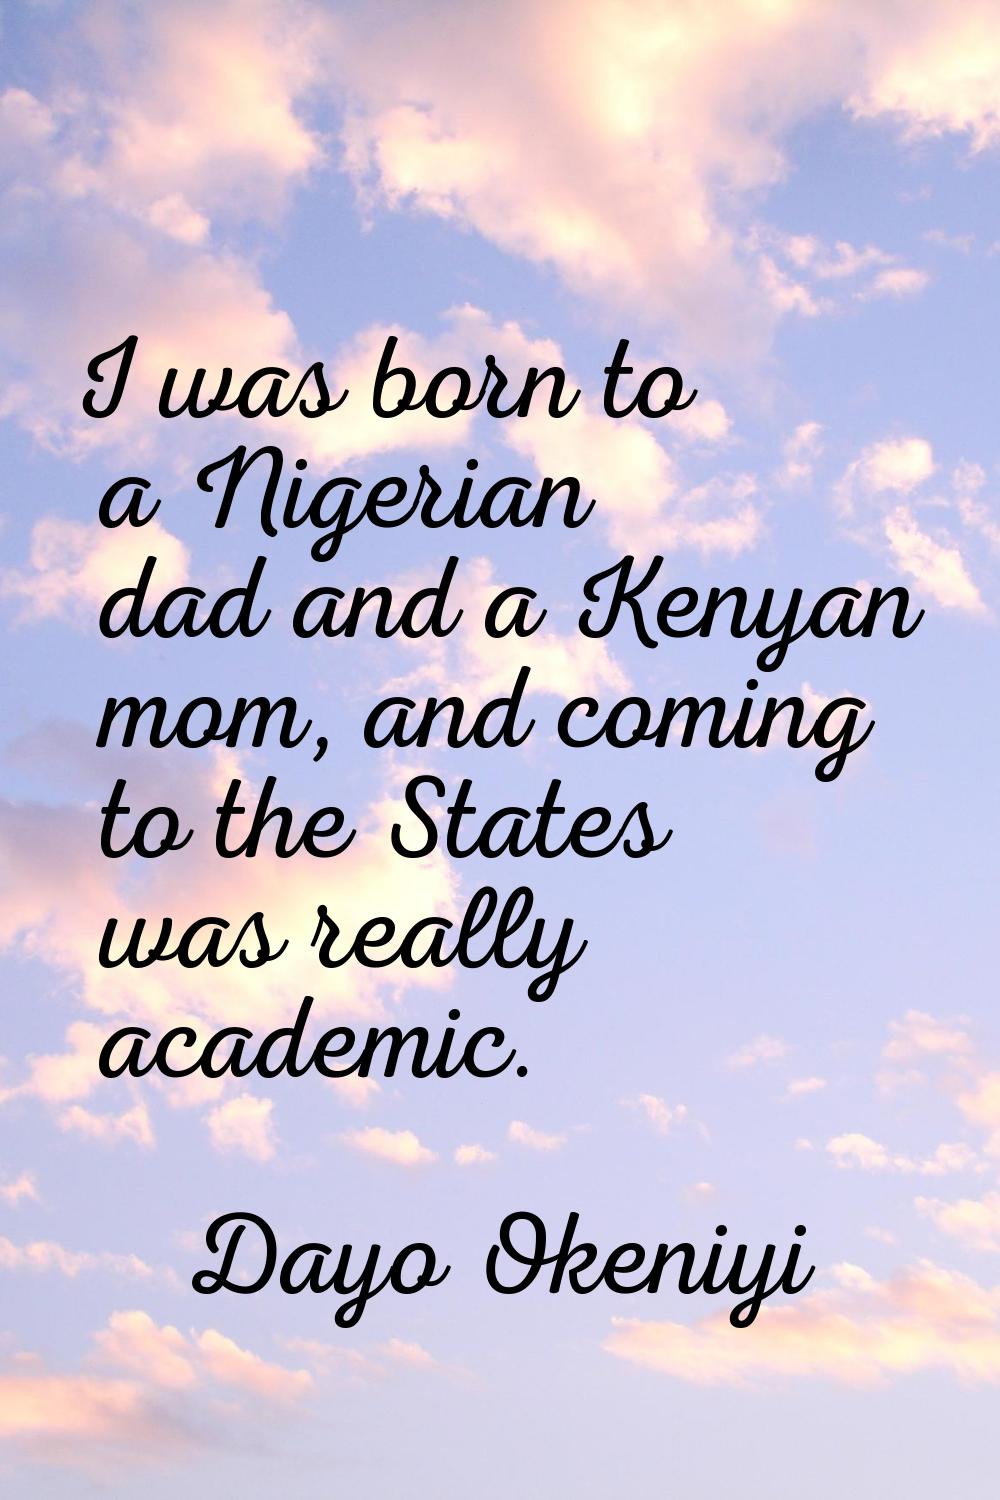 I was born to a Nigerian dad and a Kenyan mom, and coming to the States was really academic.